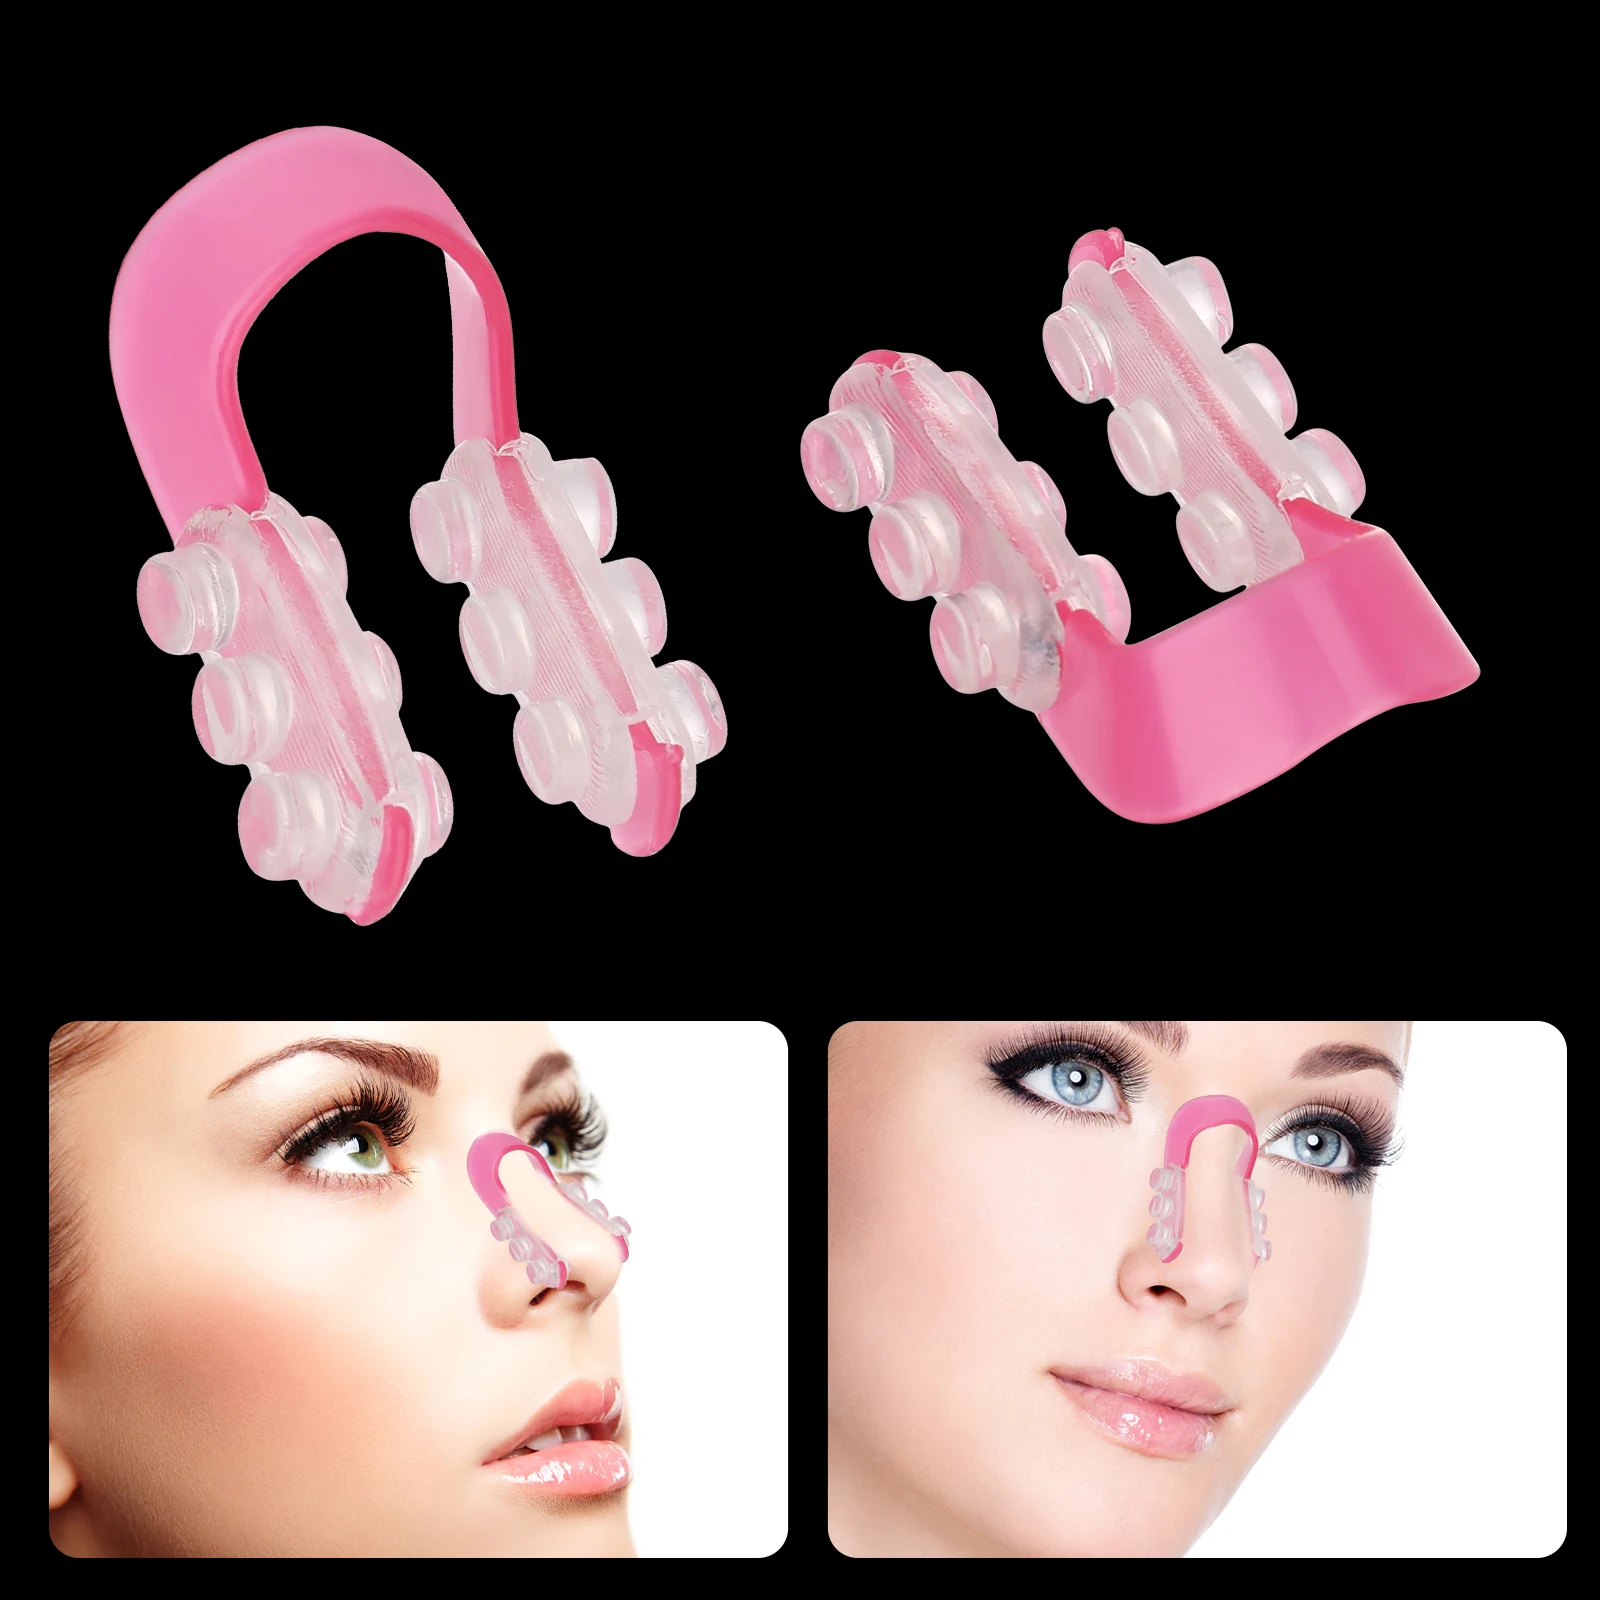 Nose Up Lifting Clip Shaper Beauty Kit - Lift & Straighten Nose